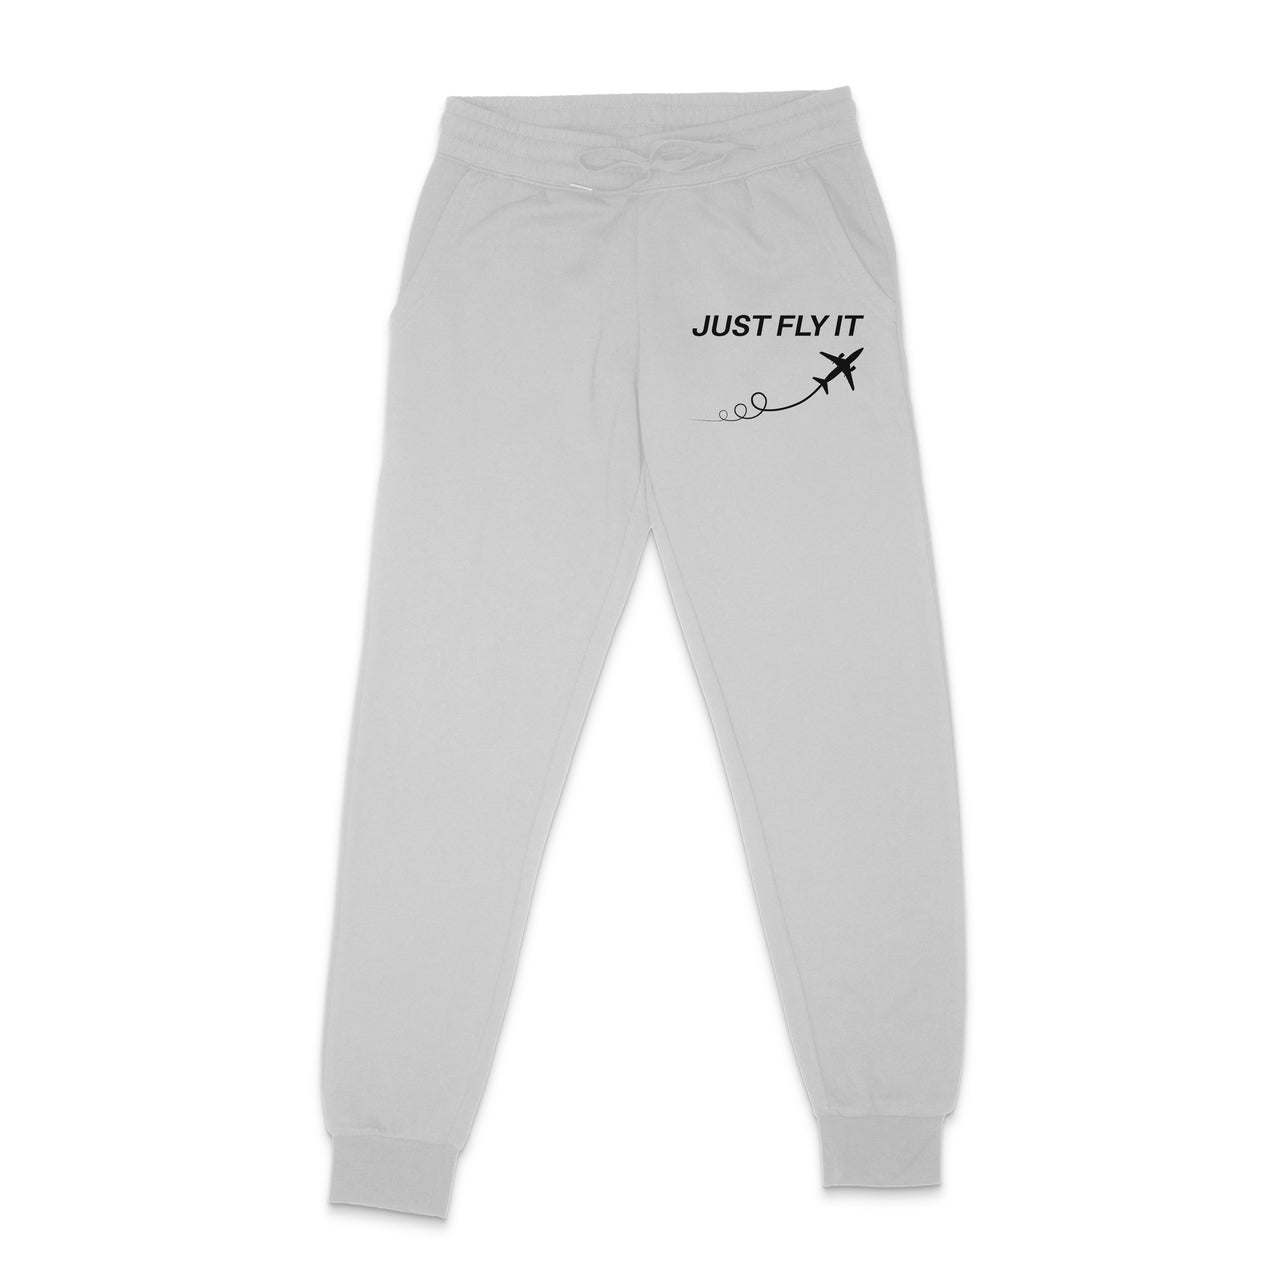 Just Fly It Designed Sweatpants